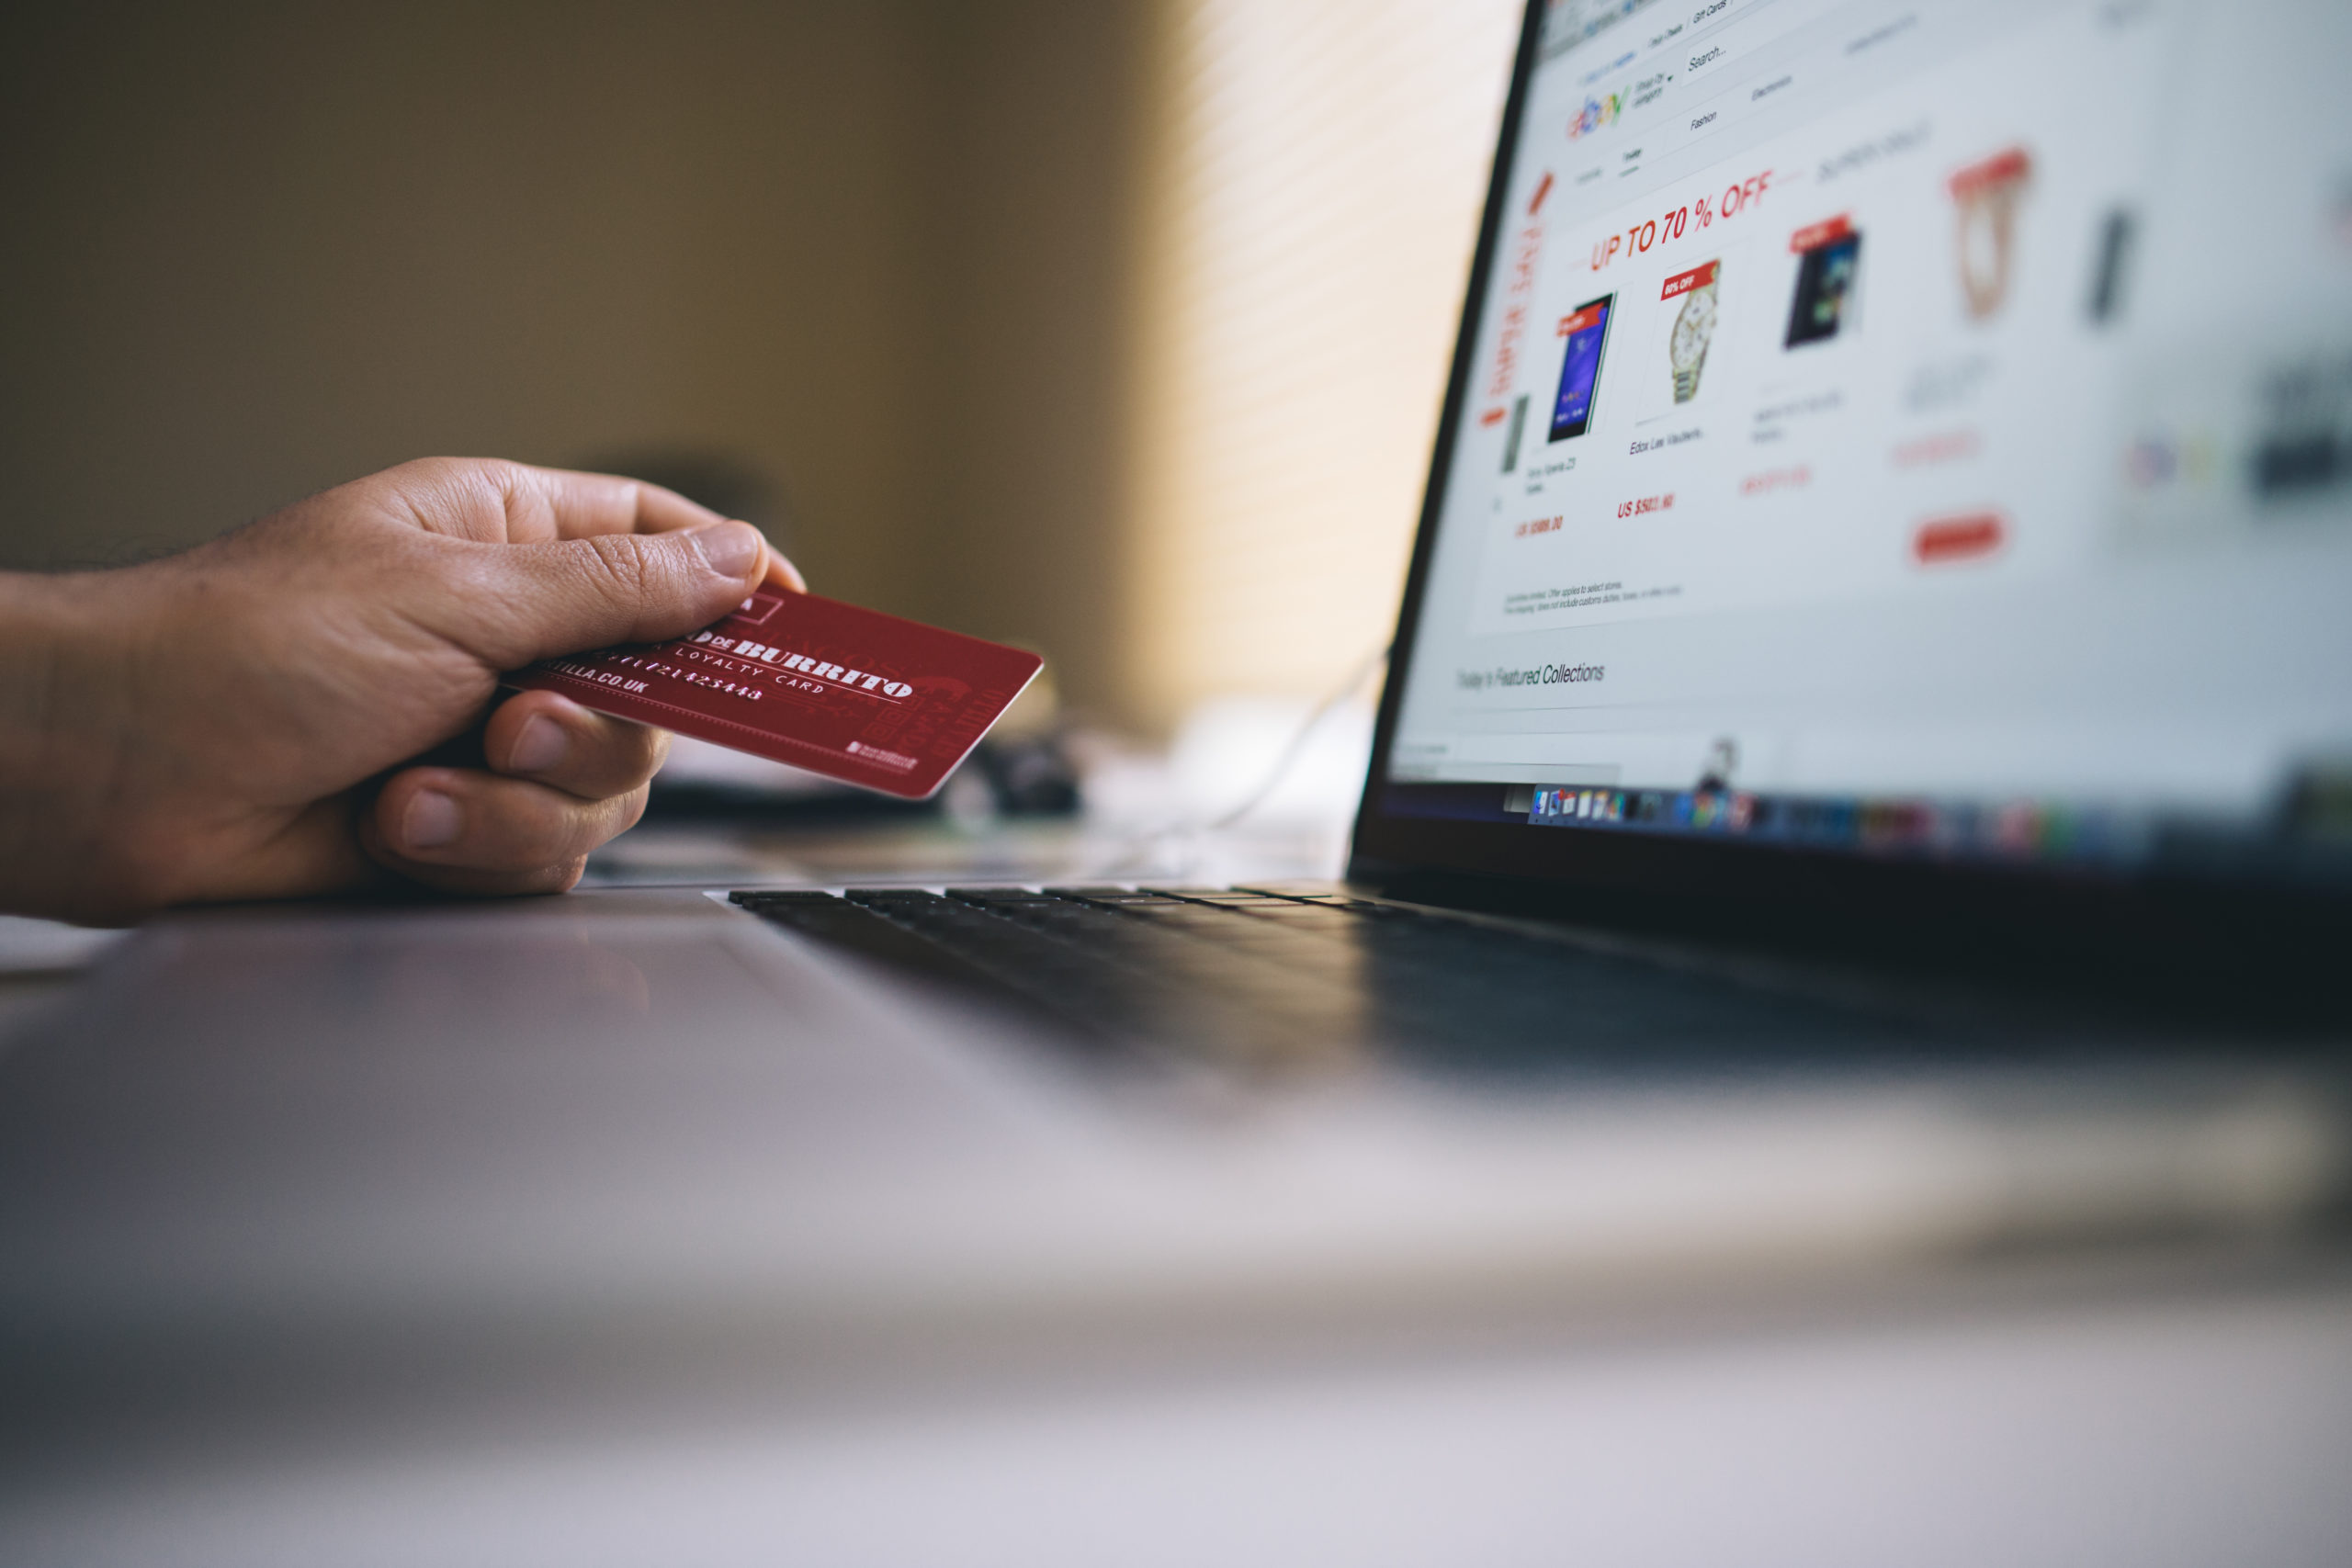 safe online shopping tips - credit card and laptop